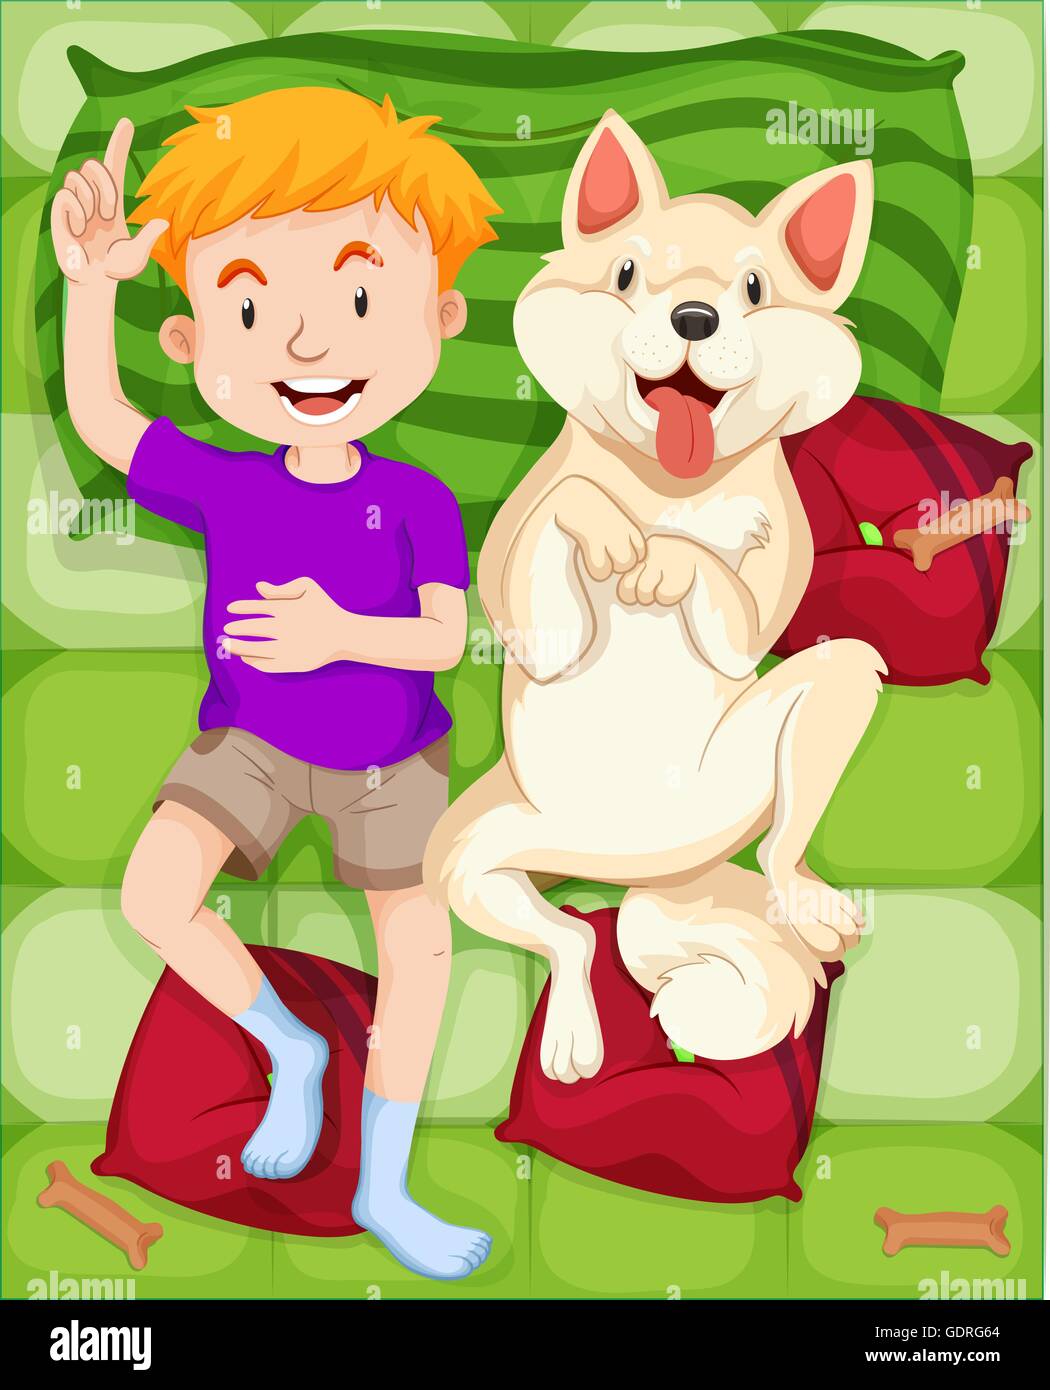 Dog and boy sleeping on the bed illustration Stock Vector